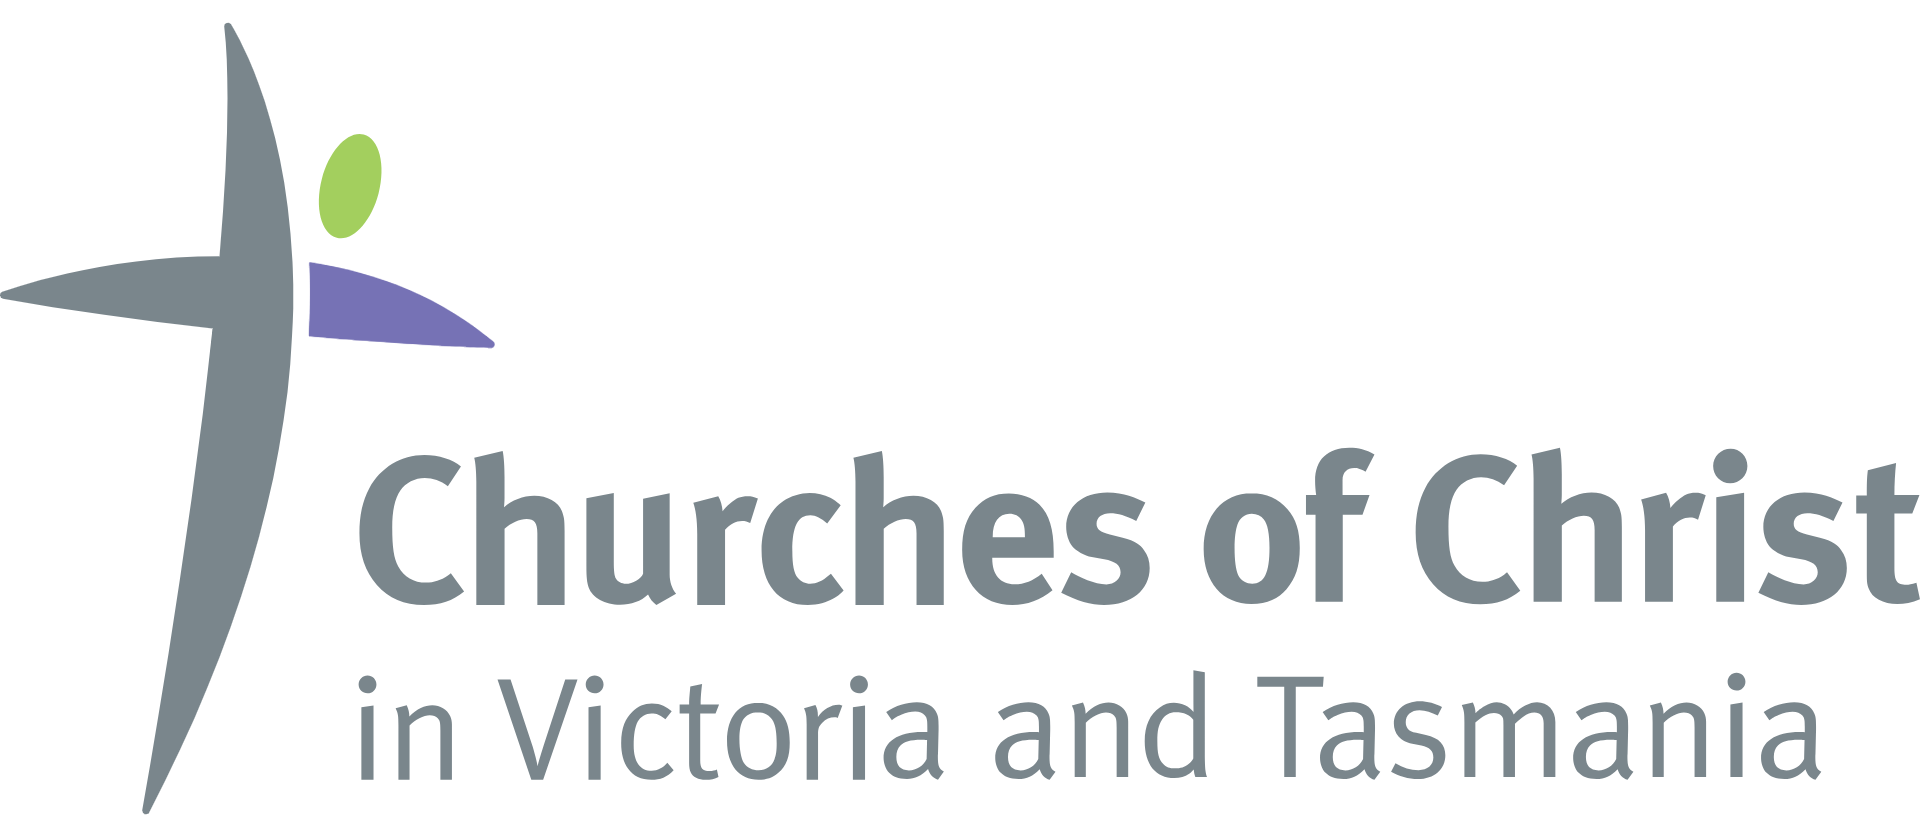 Real Estate Agency Churches of Christ Care - Victoria